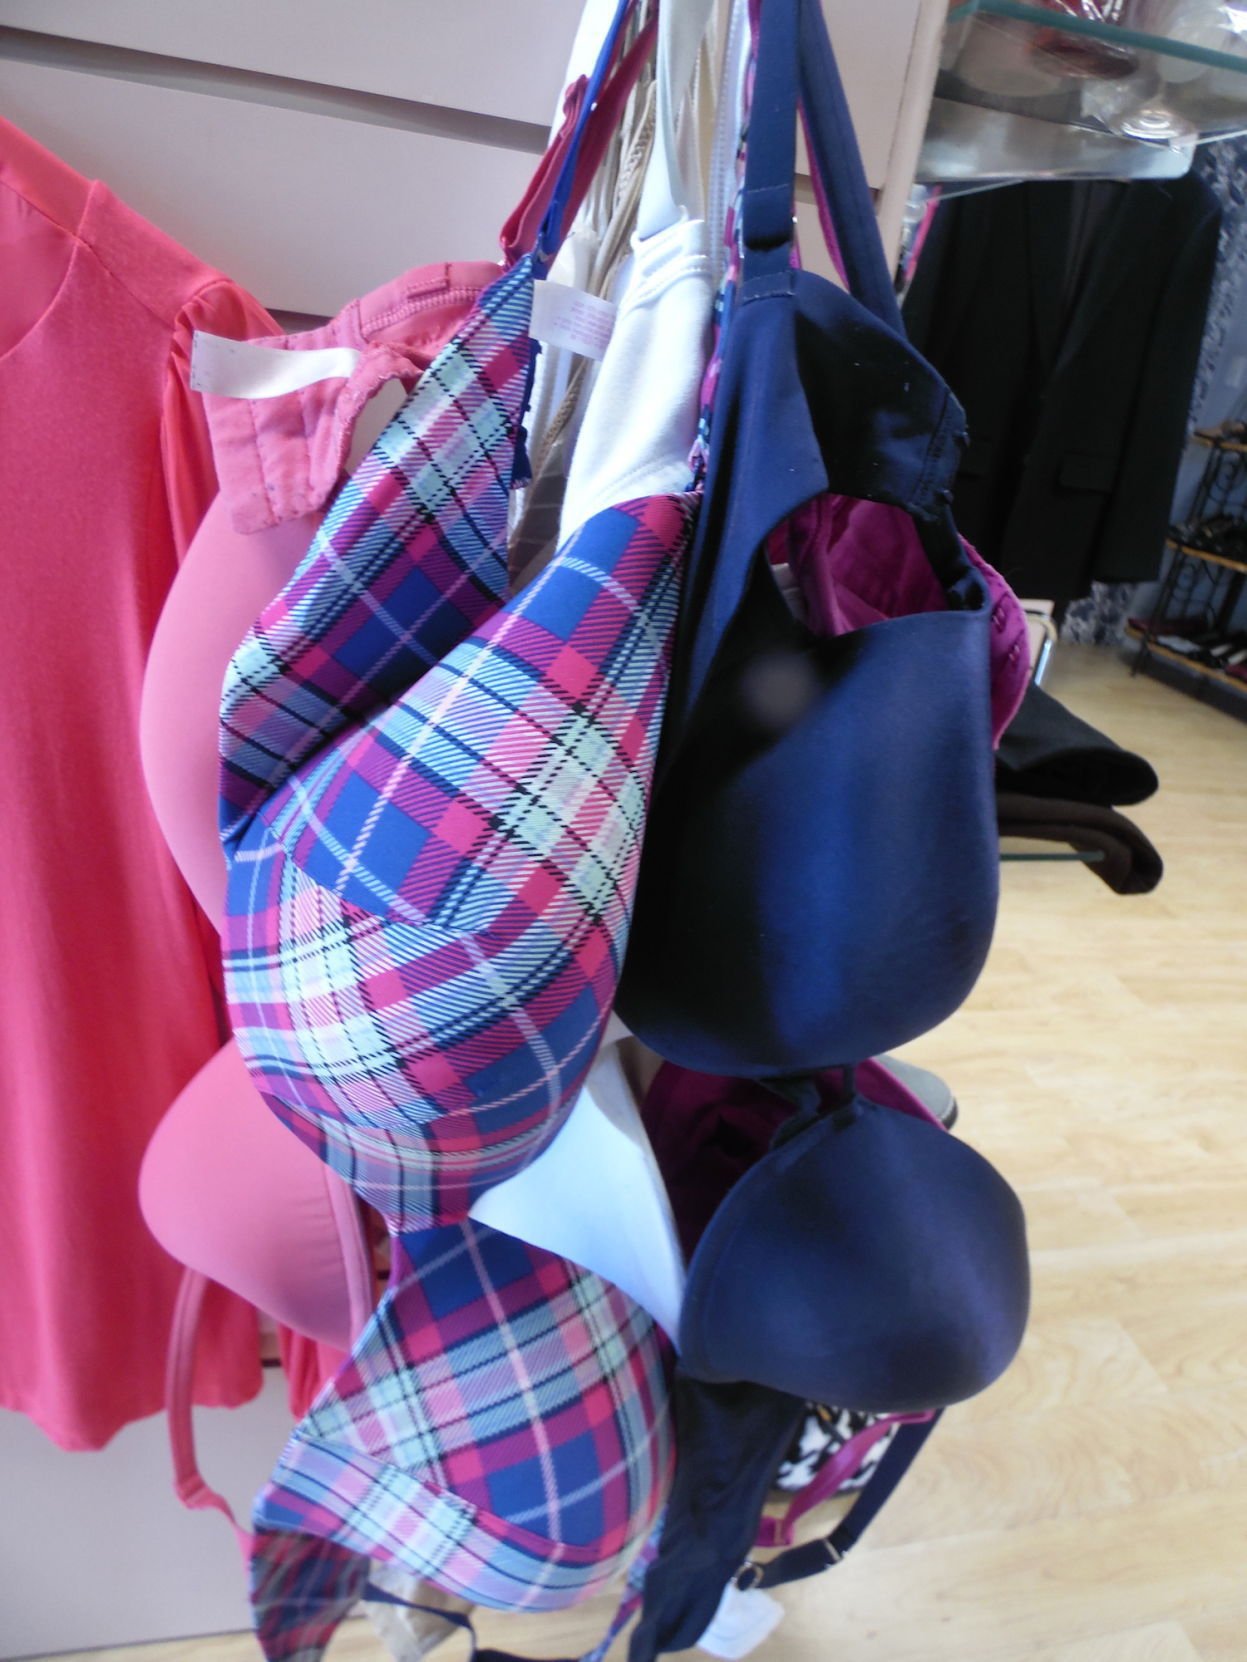 Bra Contest To Raise Money For Breast Cancer Fight Local 